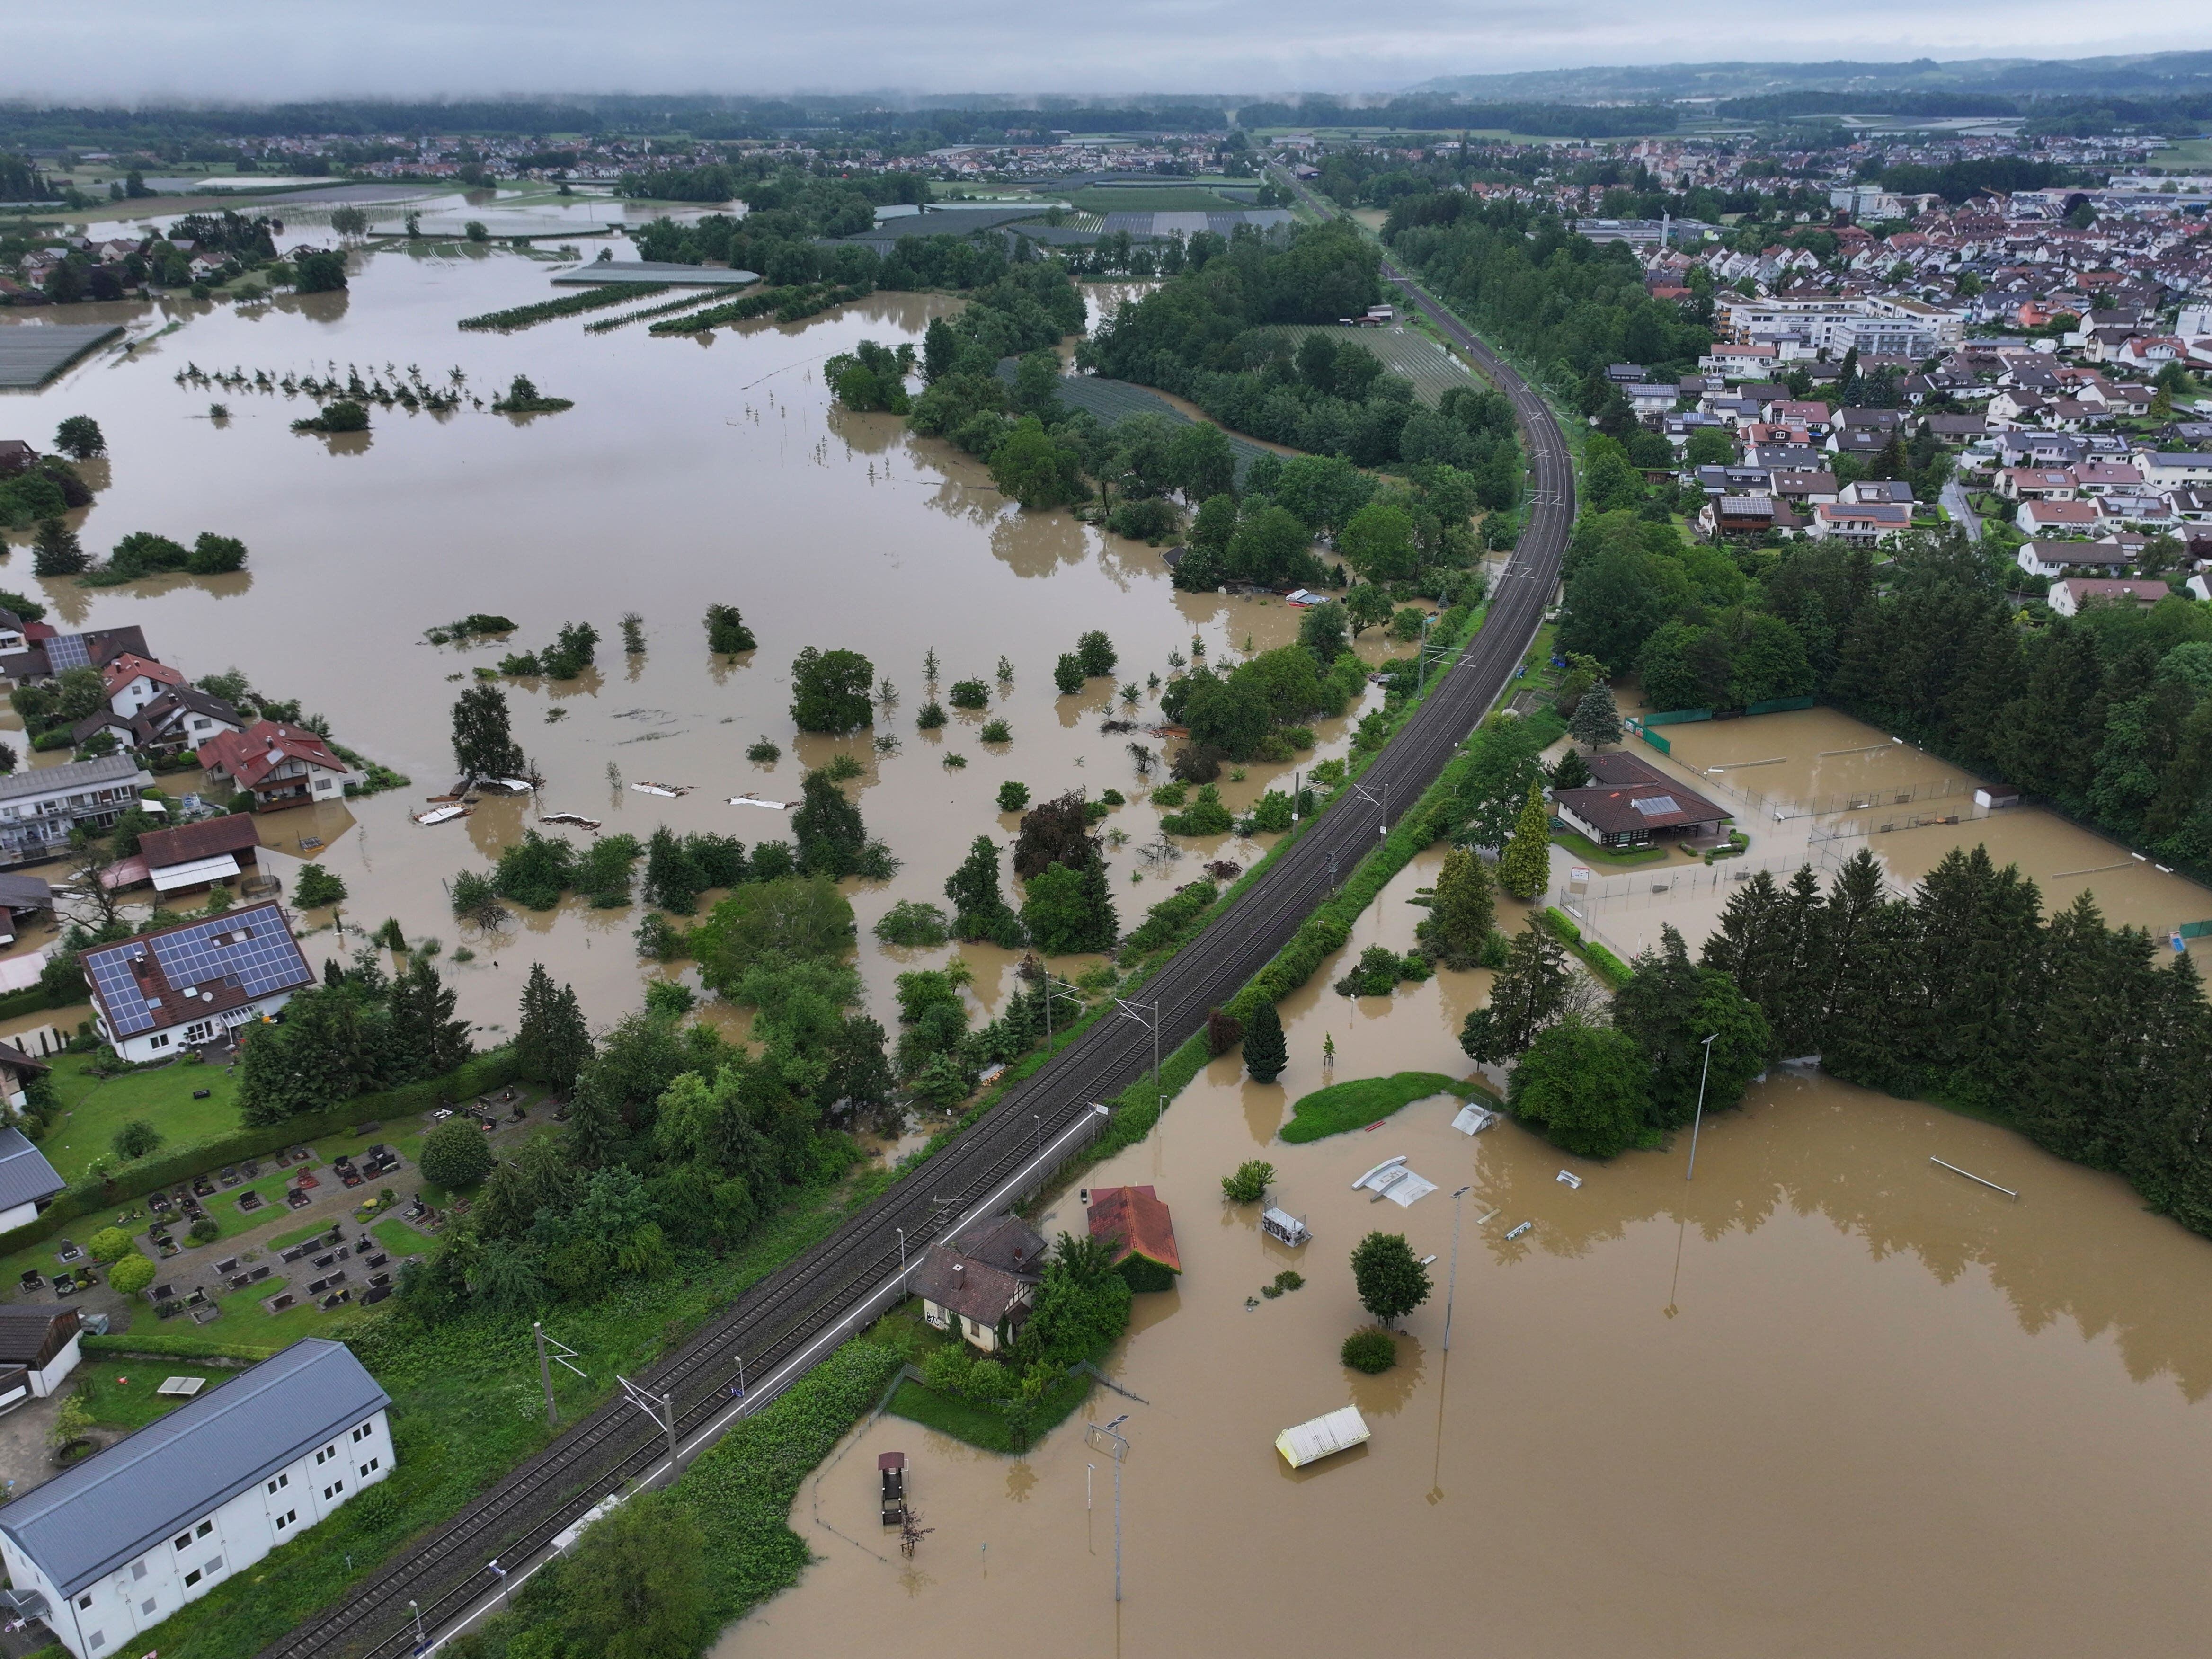 Firefighter dies and train derails amid heavy rain and flooding in Germany